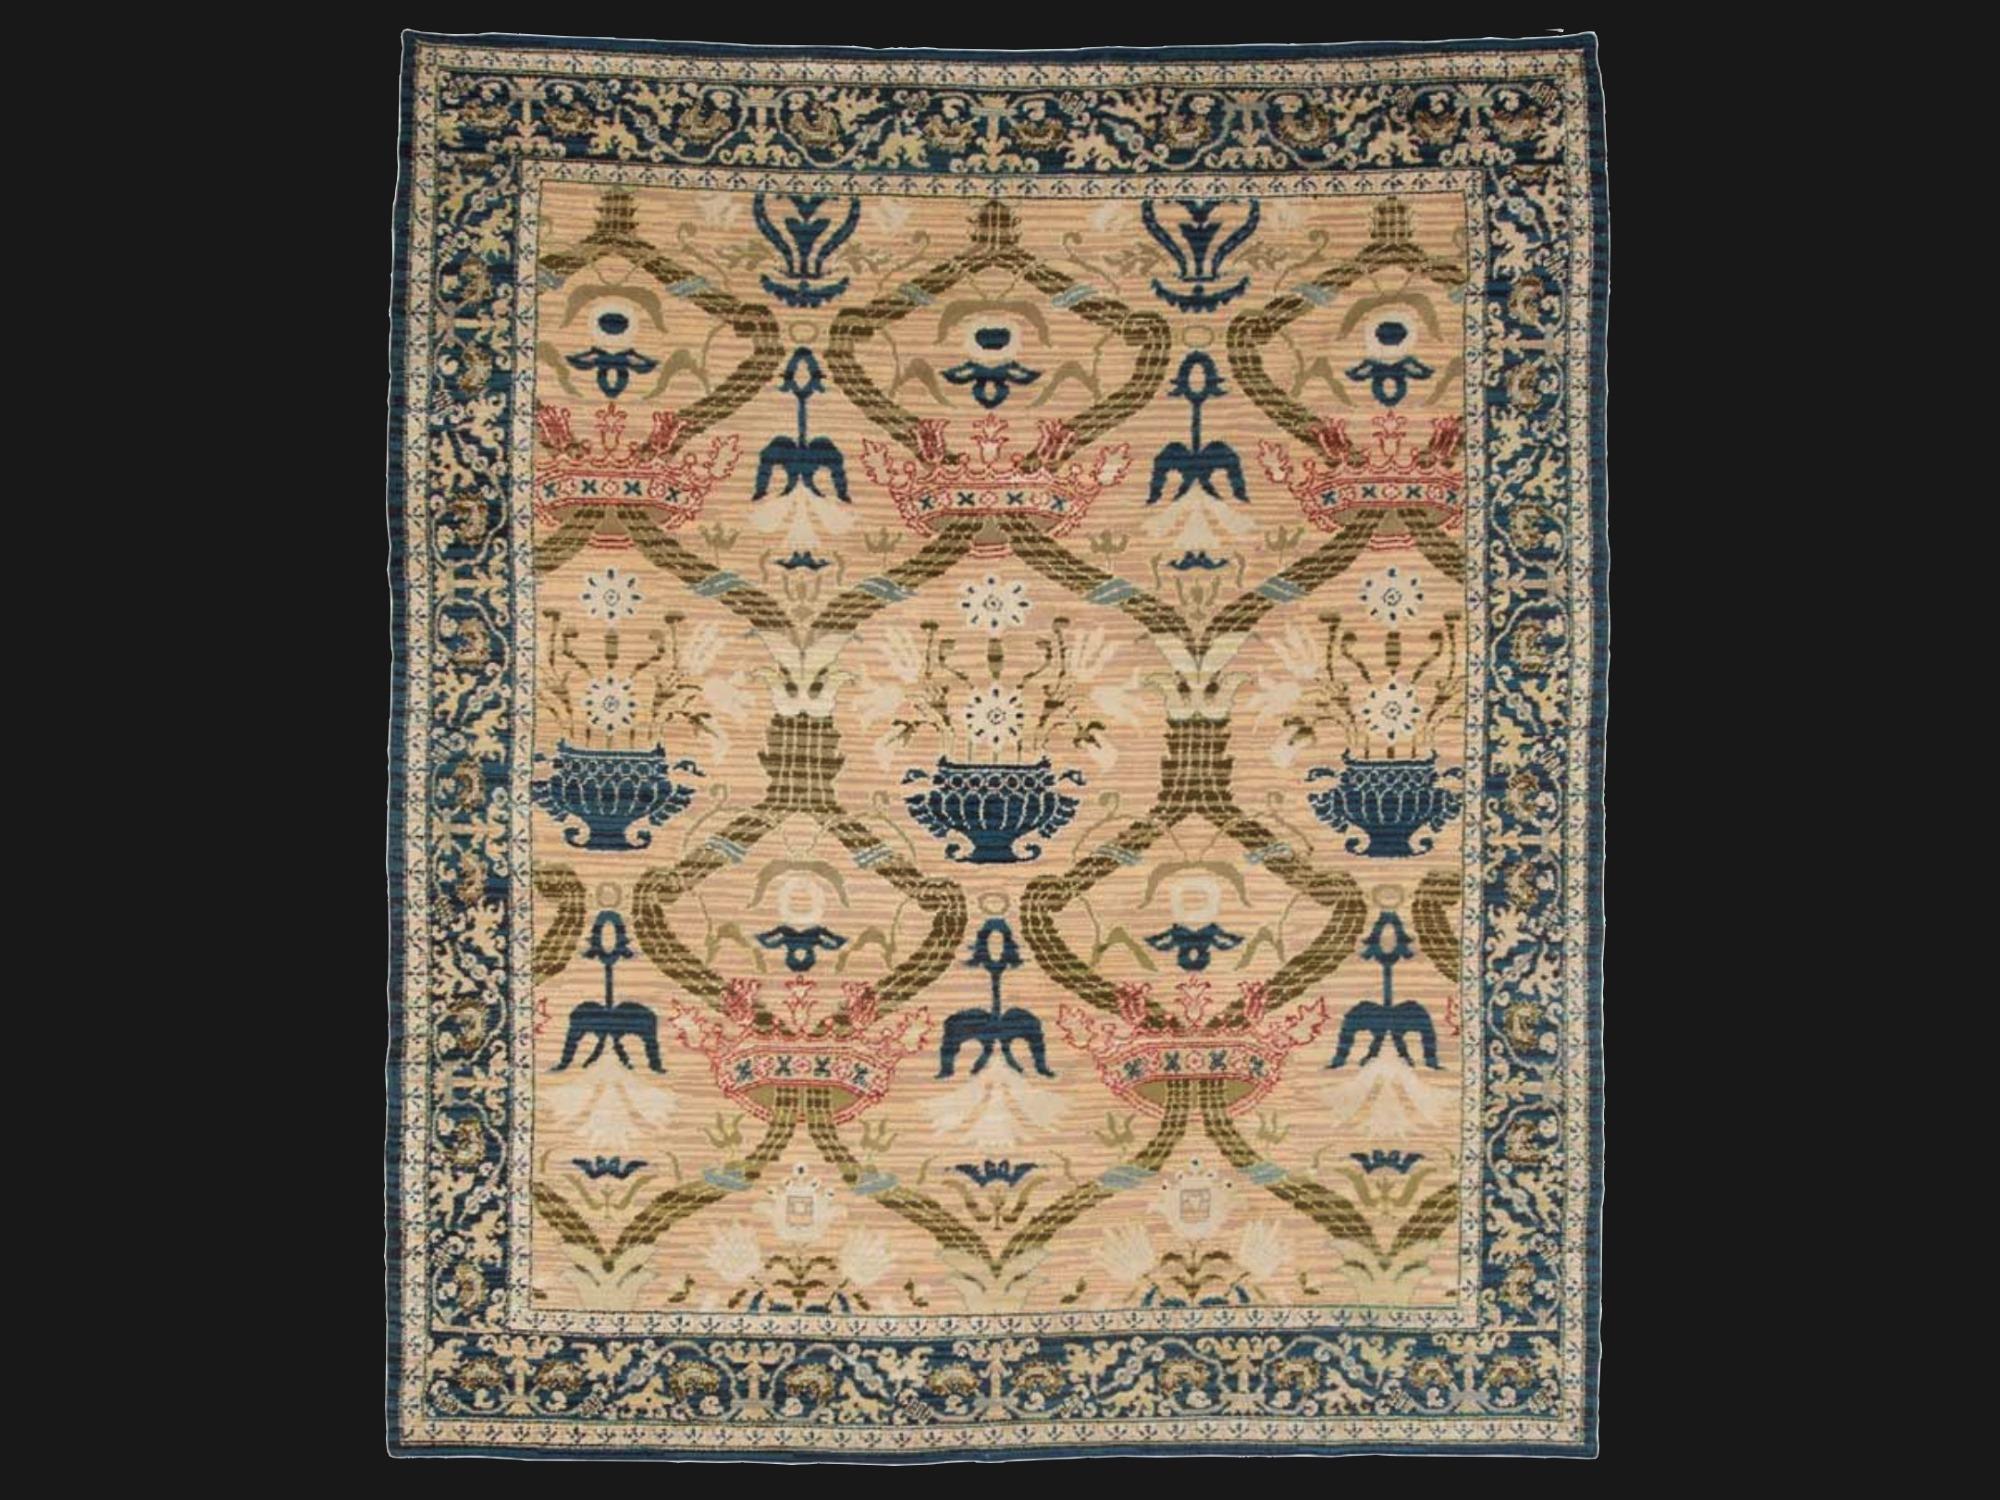 Spanish Colonial Antique Spanish Rug with Crowns